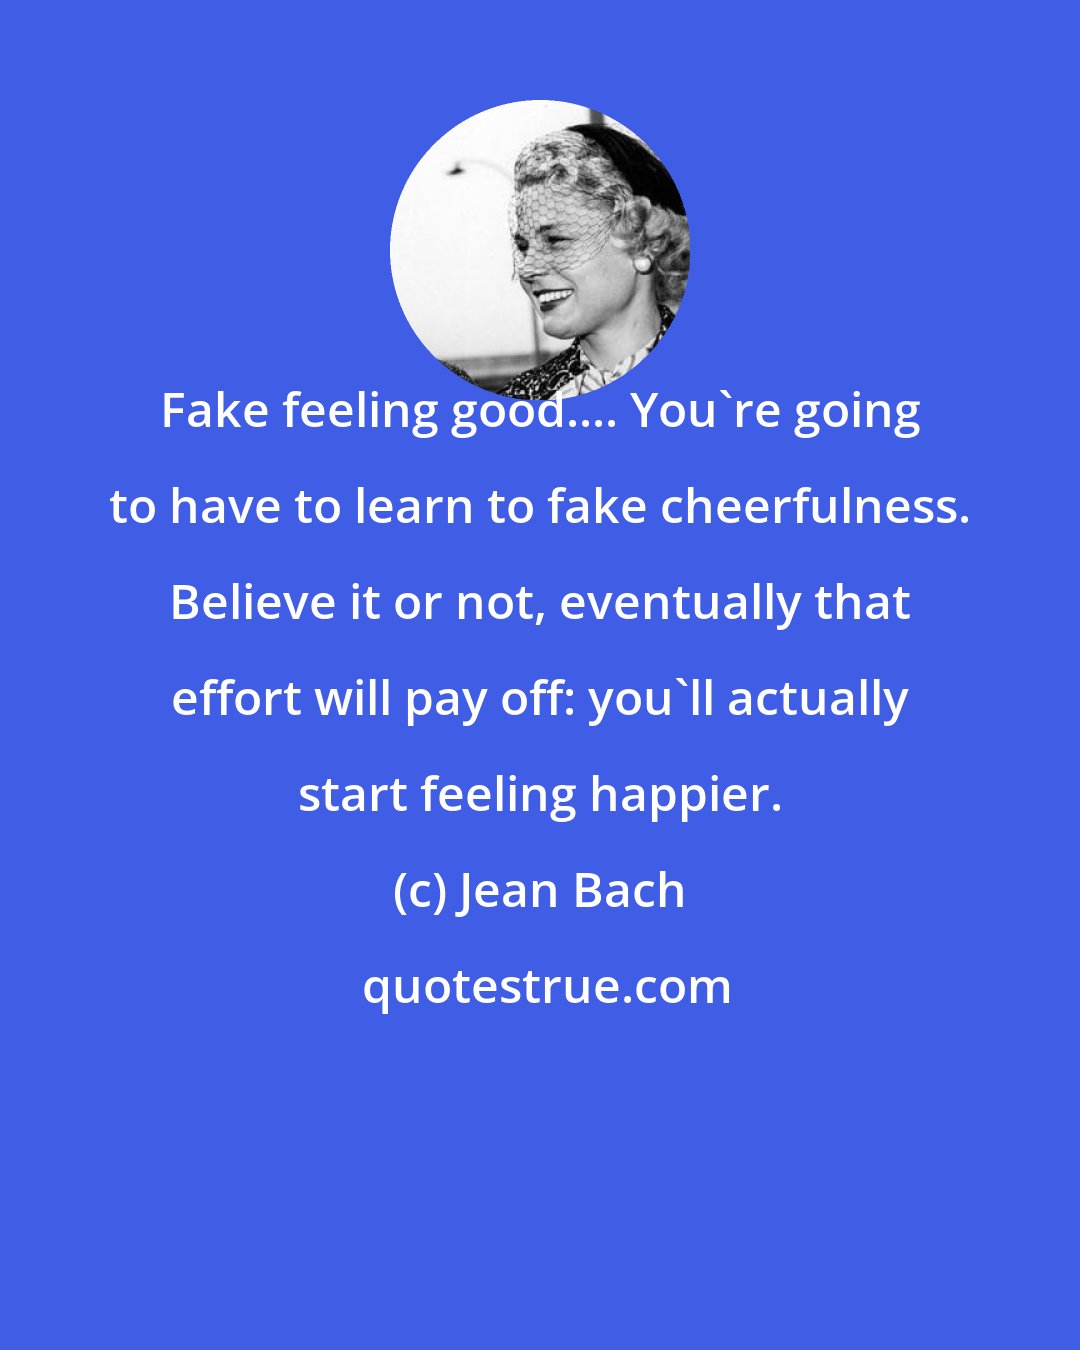 Jean Bach: Fake feeling good.... You're going to have to learn to fake cheerfulness. Believe it or not, eventually that effort will pay off: you'll actually start feeling happier.